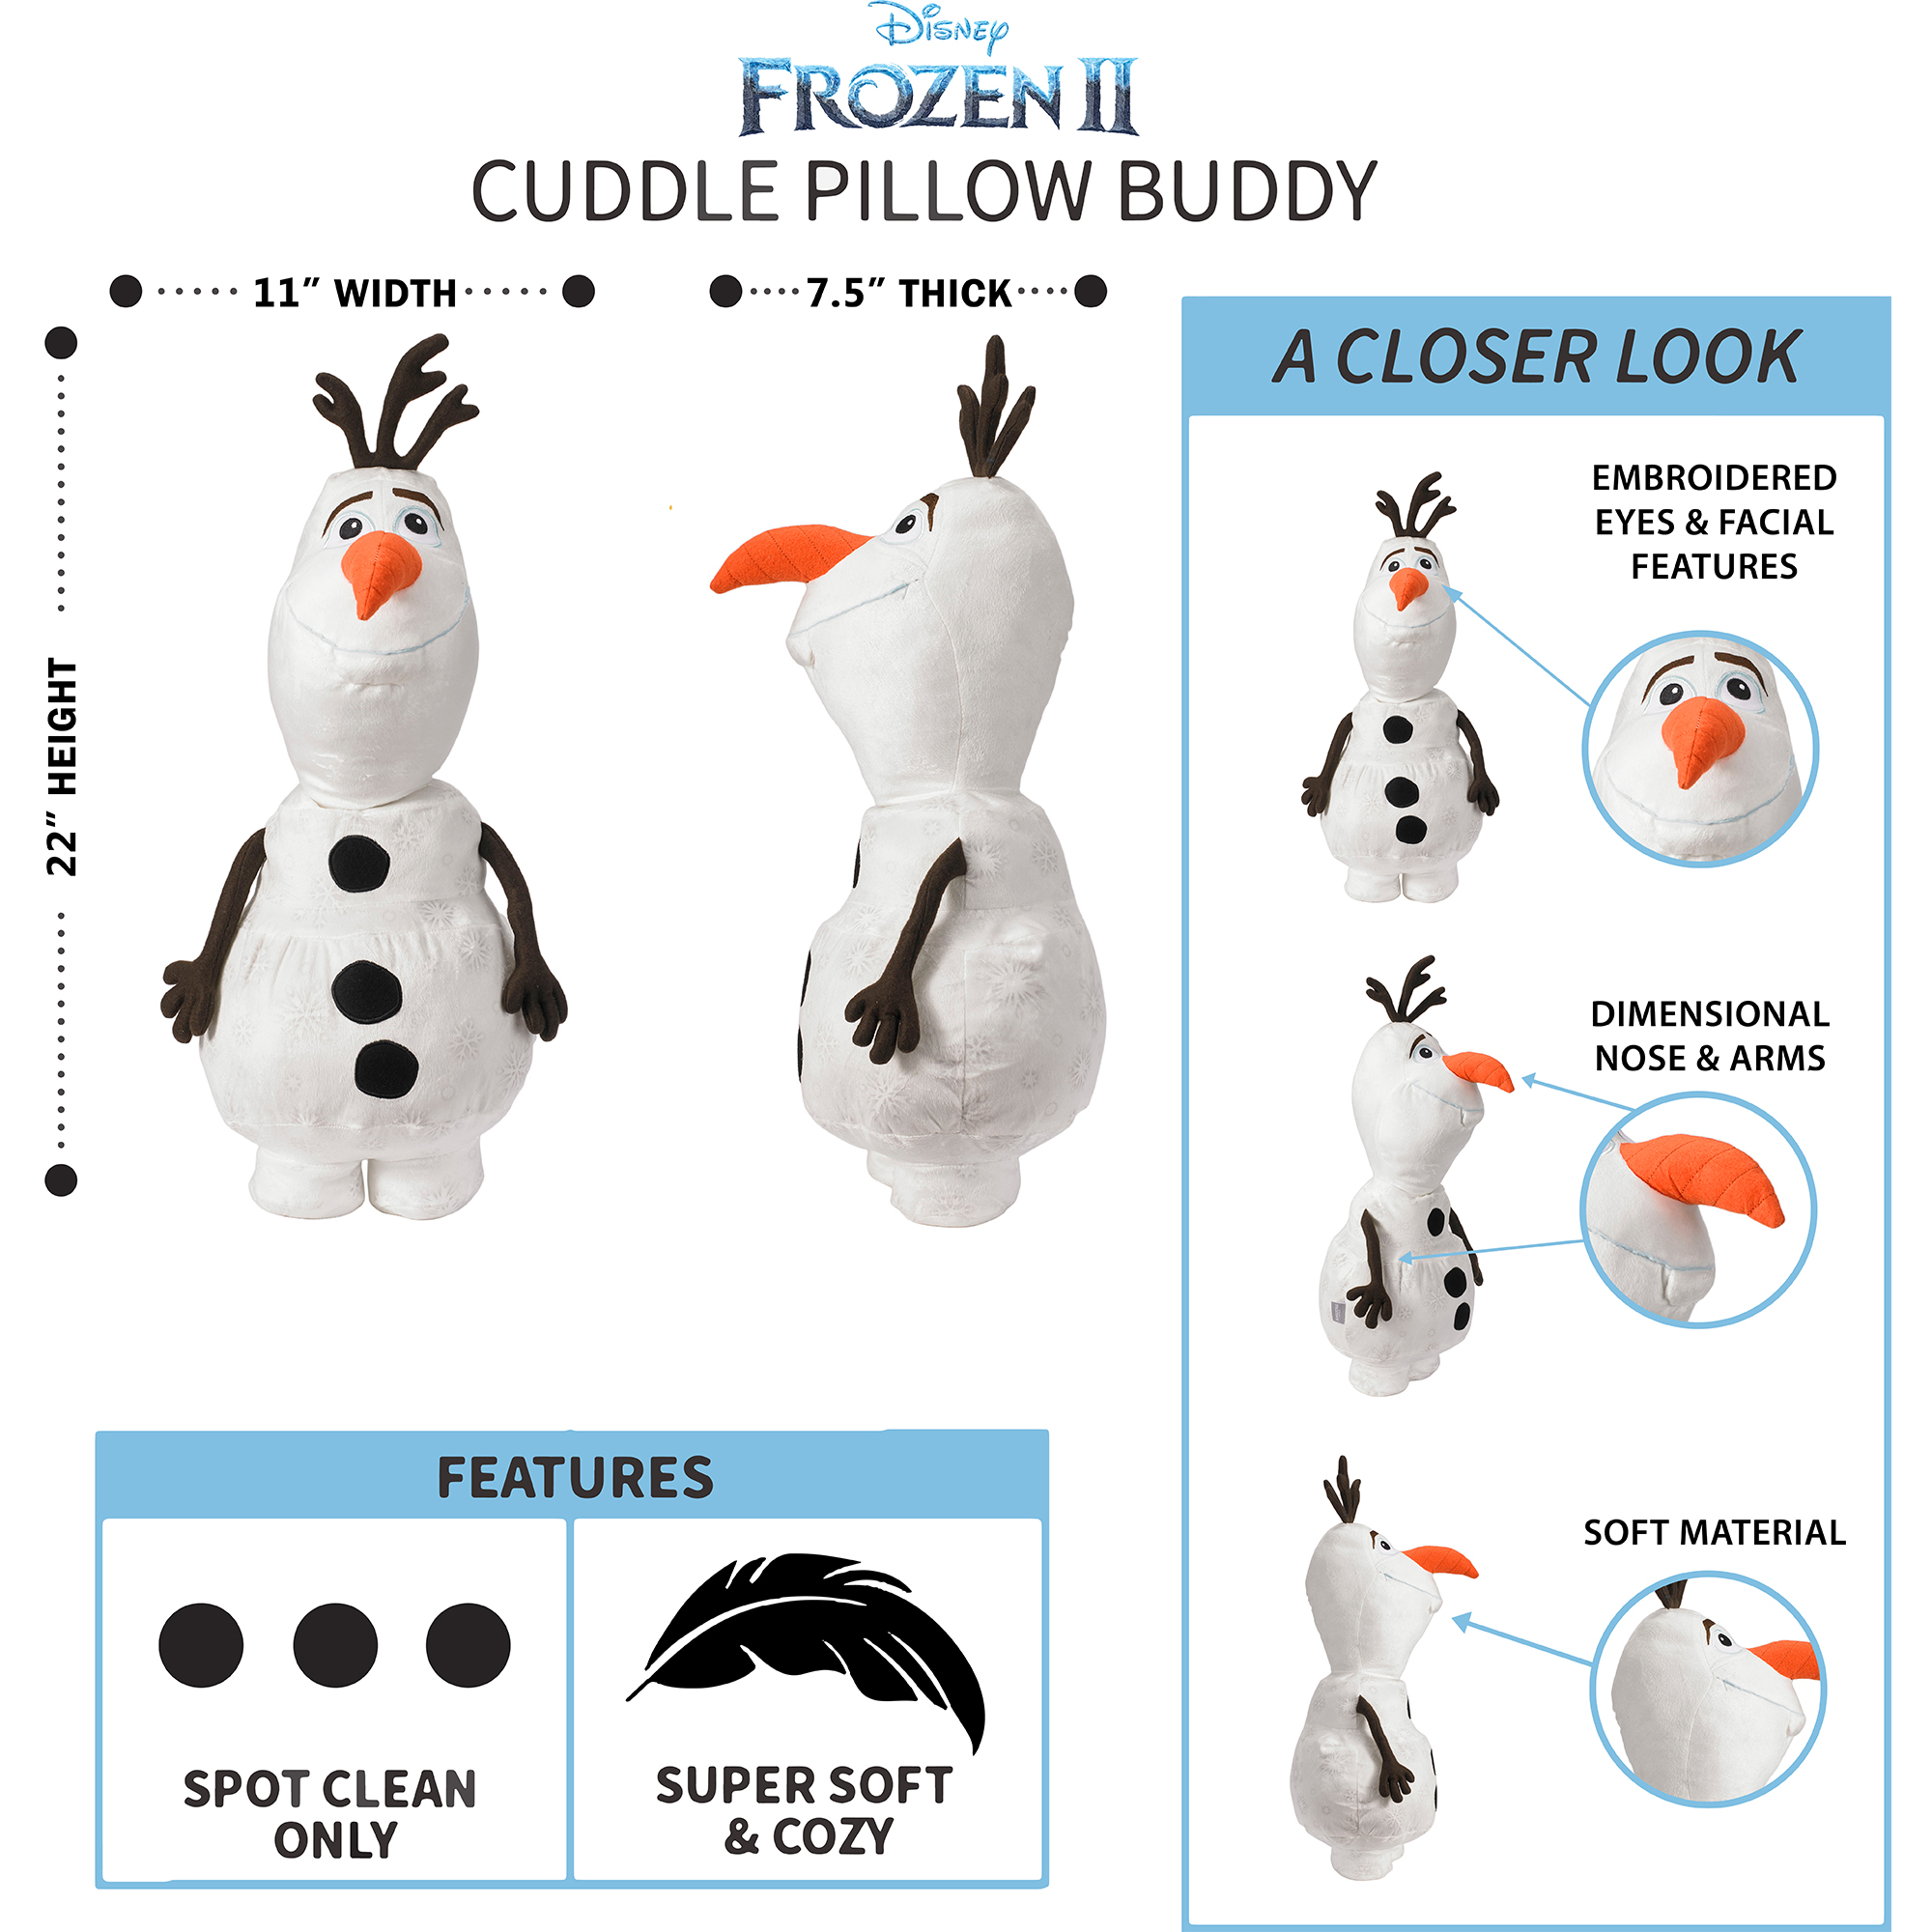 Disney Frozen Kids Olaf Bedding Plush Cuddle and Decorative Pillow Buddy, White - image 4 of 7